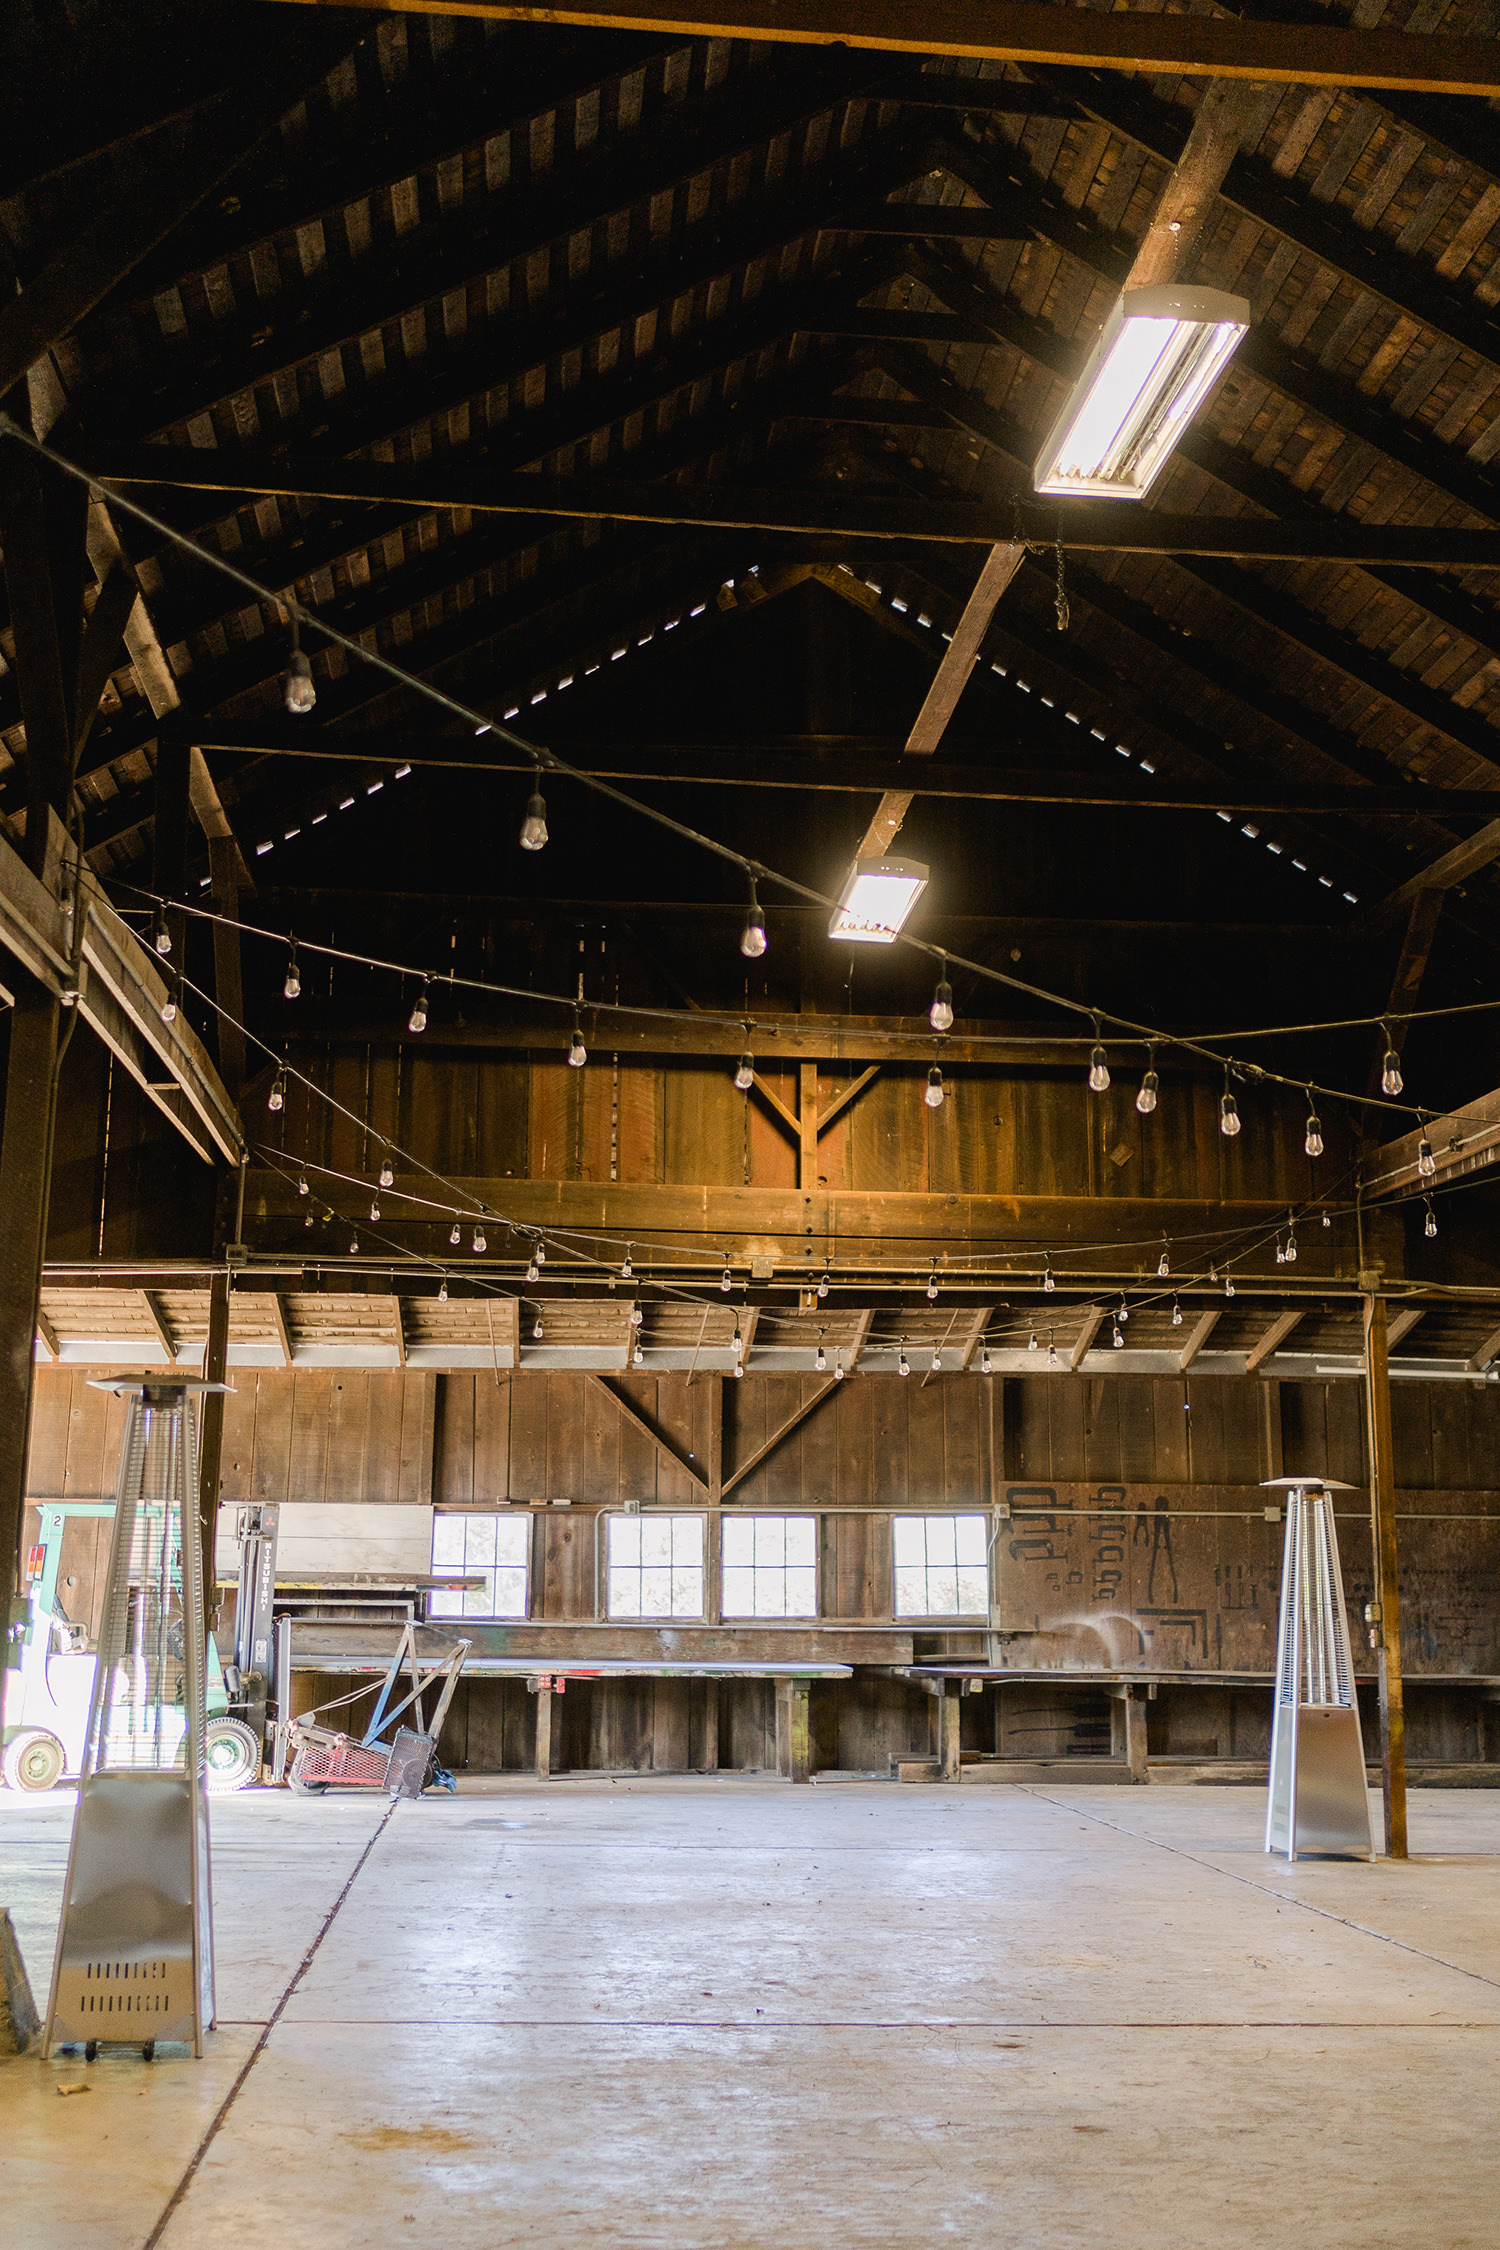 abele farms wedding venue woodland ca by adrienne and dani photography